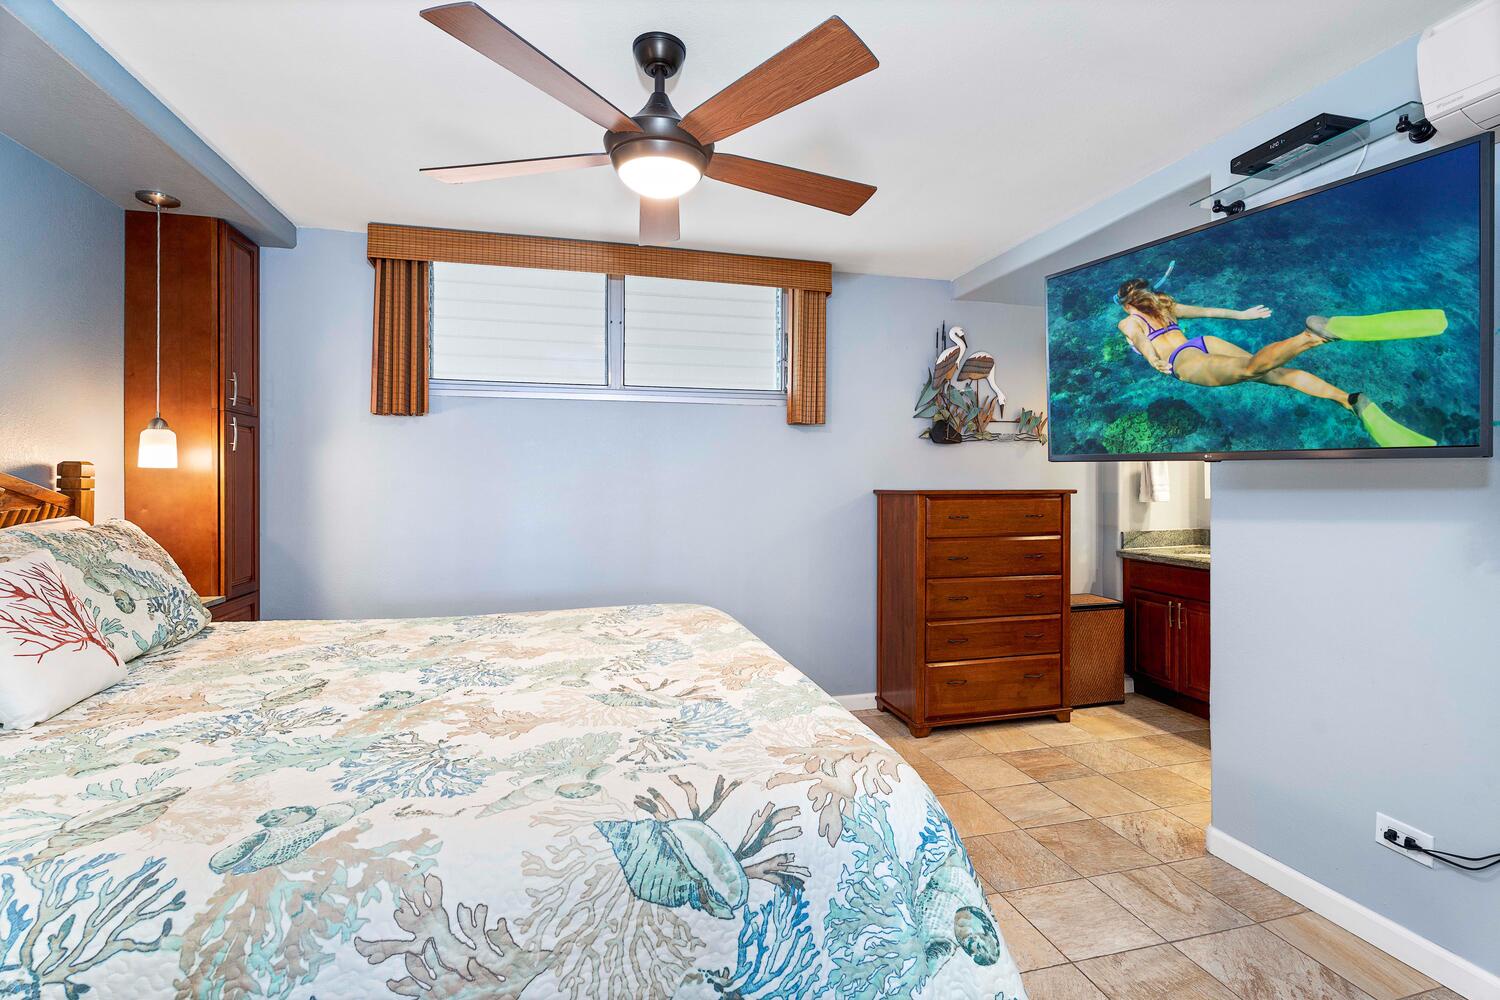 Kailua Kona Vacation Rentals, Kona Alii 403 - Never miss an episode of your favorite show!